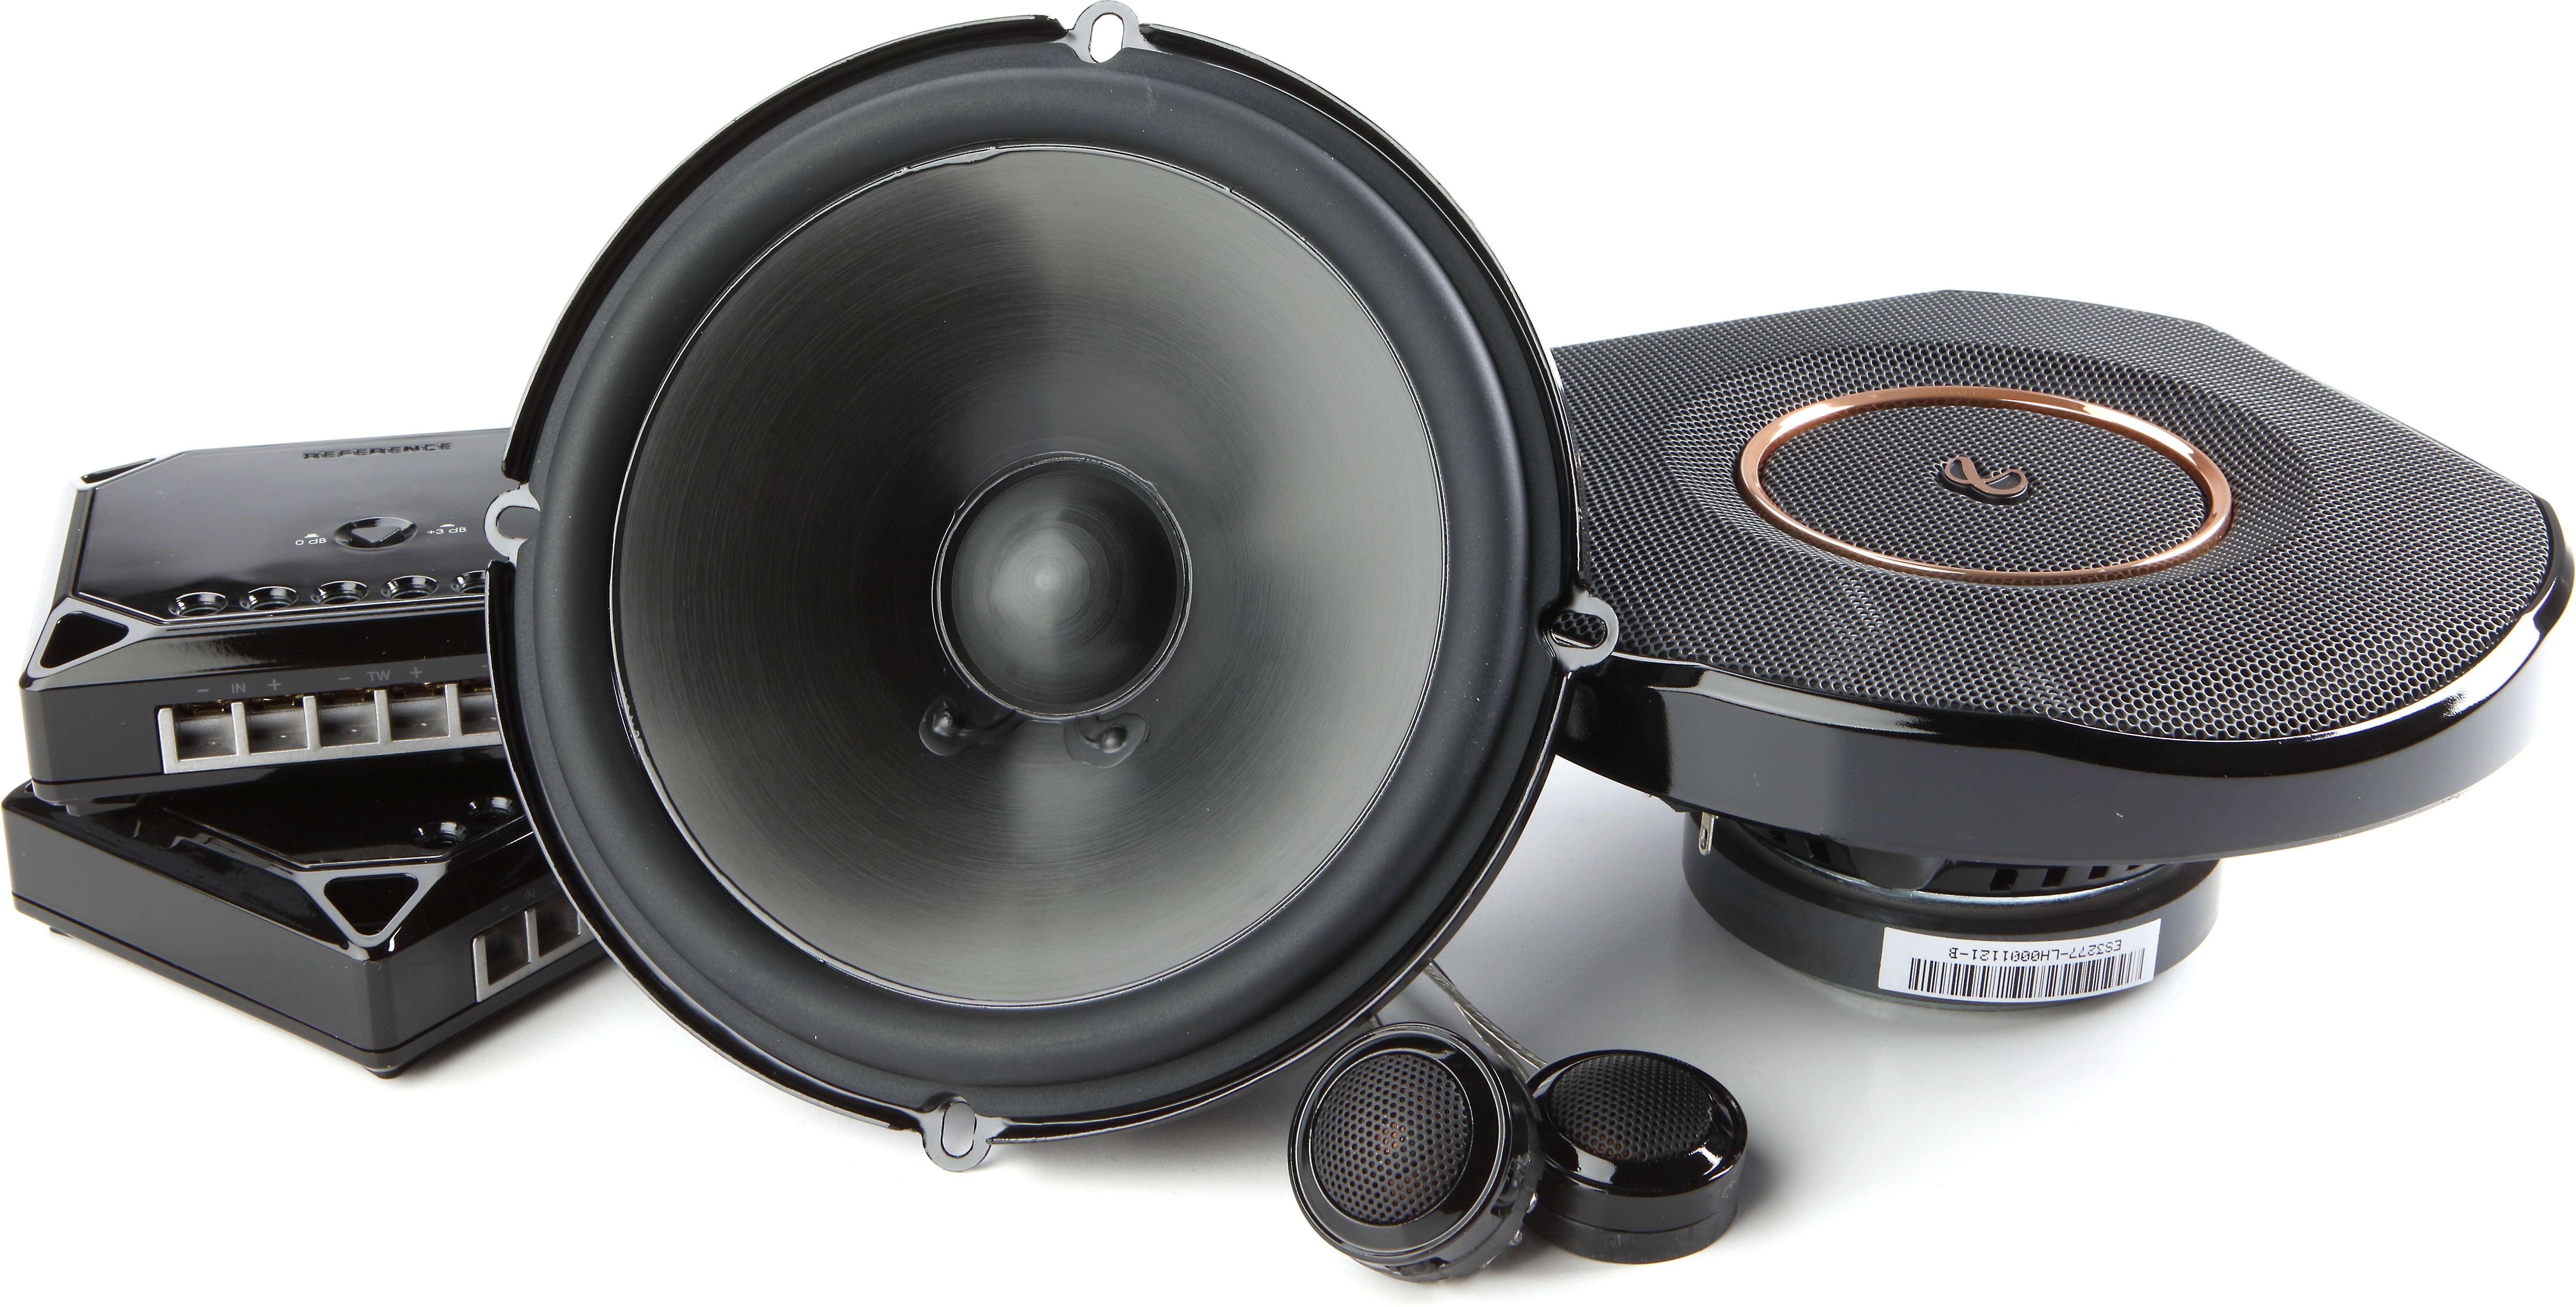 Infinity　Reviews:　Series　Reference　system　component　speaker　Reference　Crutchfield　REF-6530cx　Customer　at　6-1/2